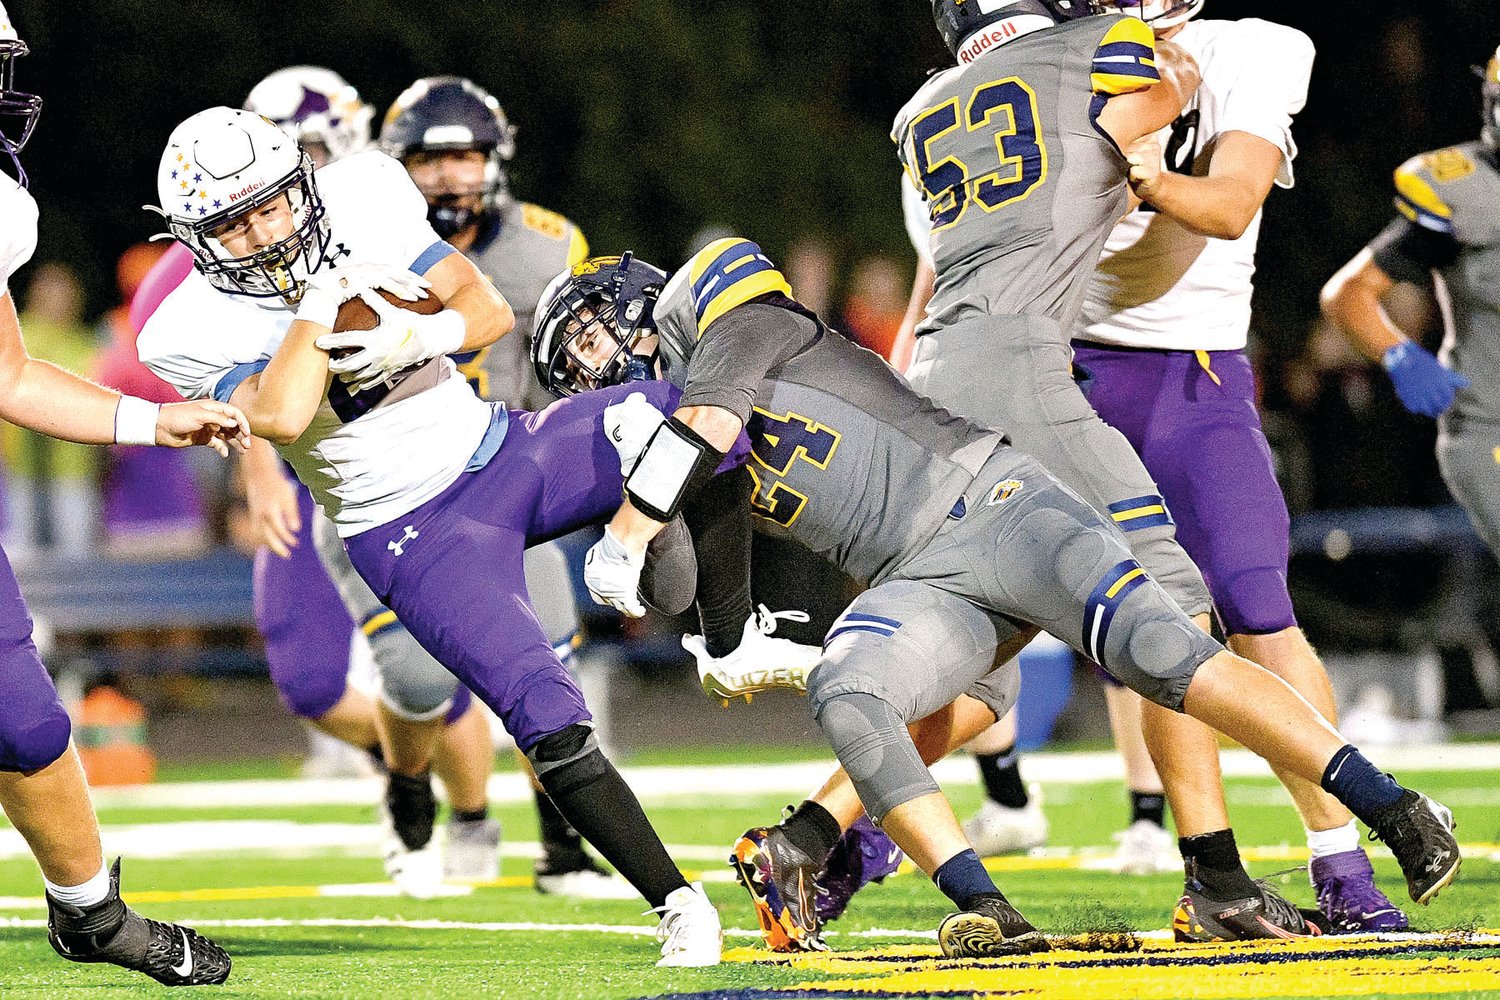 As he makes the tackle, New Hope linebacker Jude Hutkin grabs the leg of Upper Moreland running back Tomas Carr.